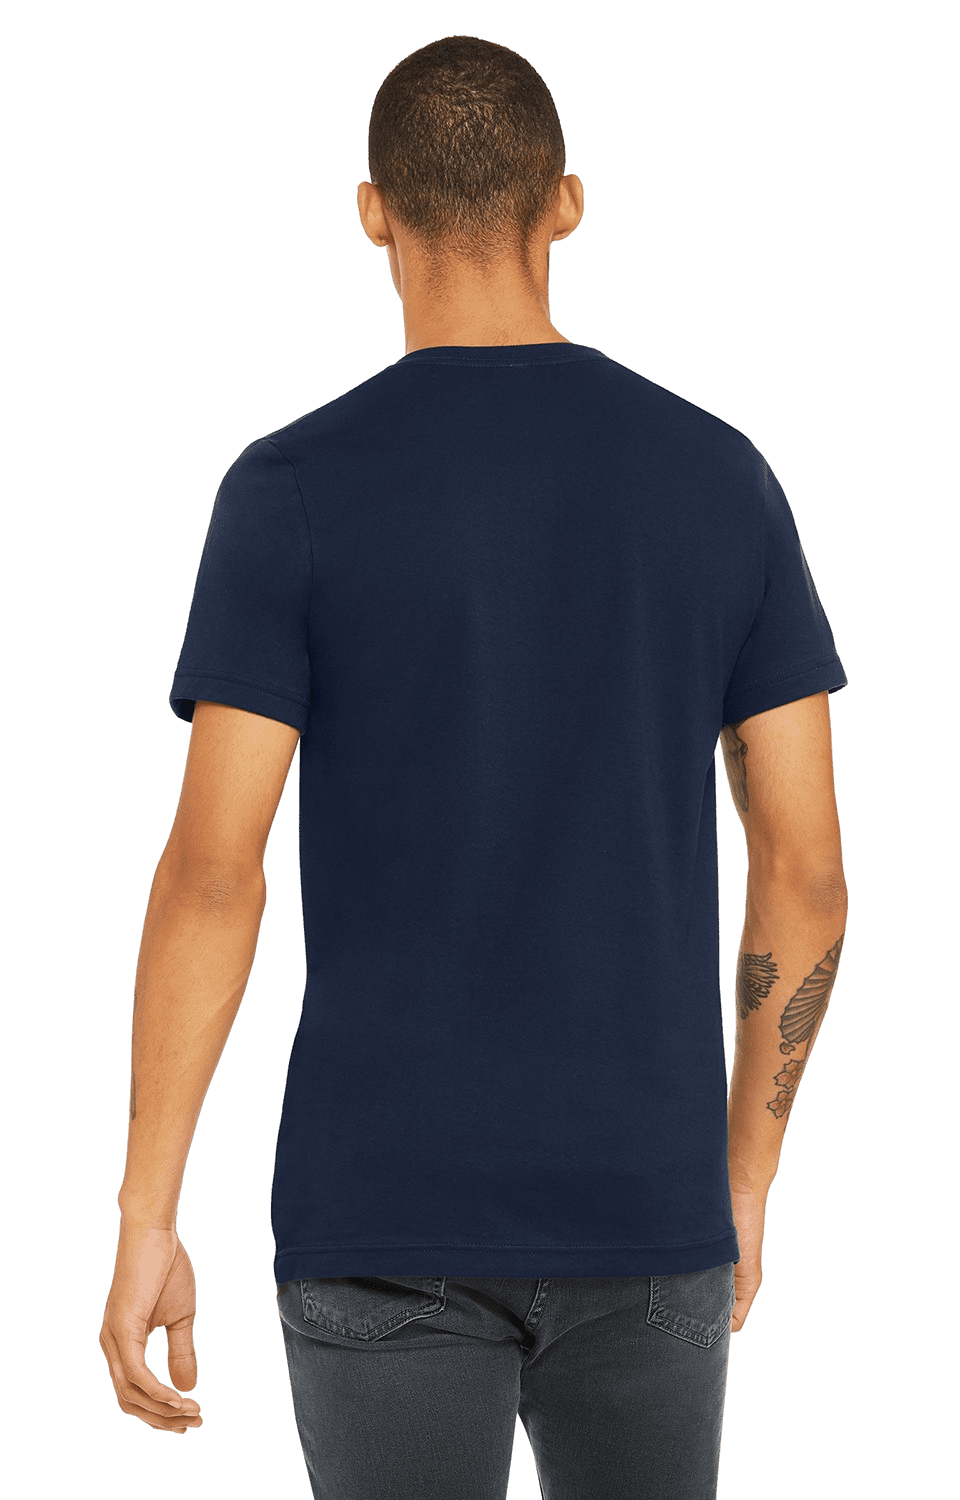 T-shirt for Man Front and Back with Fishing Blue Theme. Mock-up for  Double-sided Printing, Layered and Editable Stock Vector - Illustration of  design, rear: 235488849